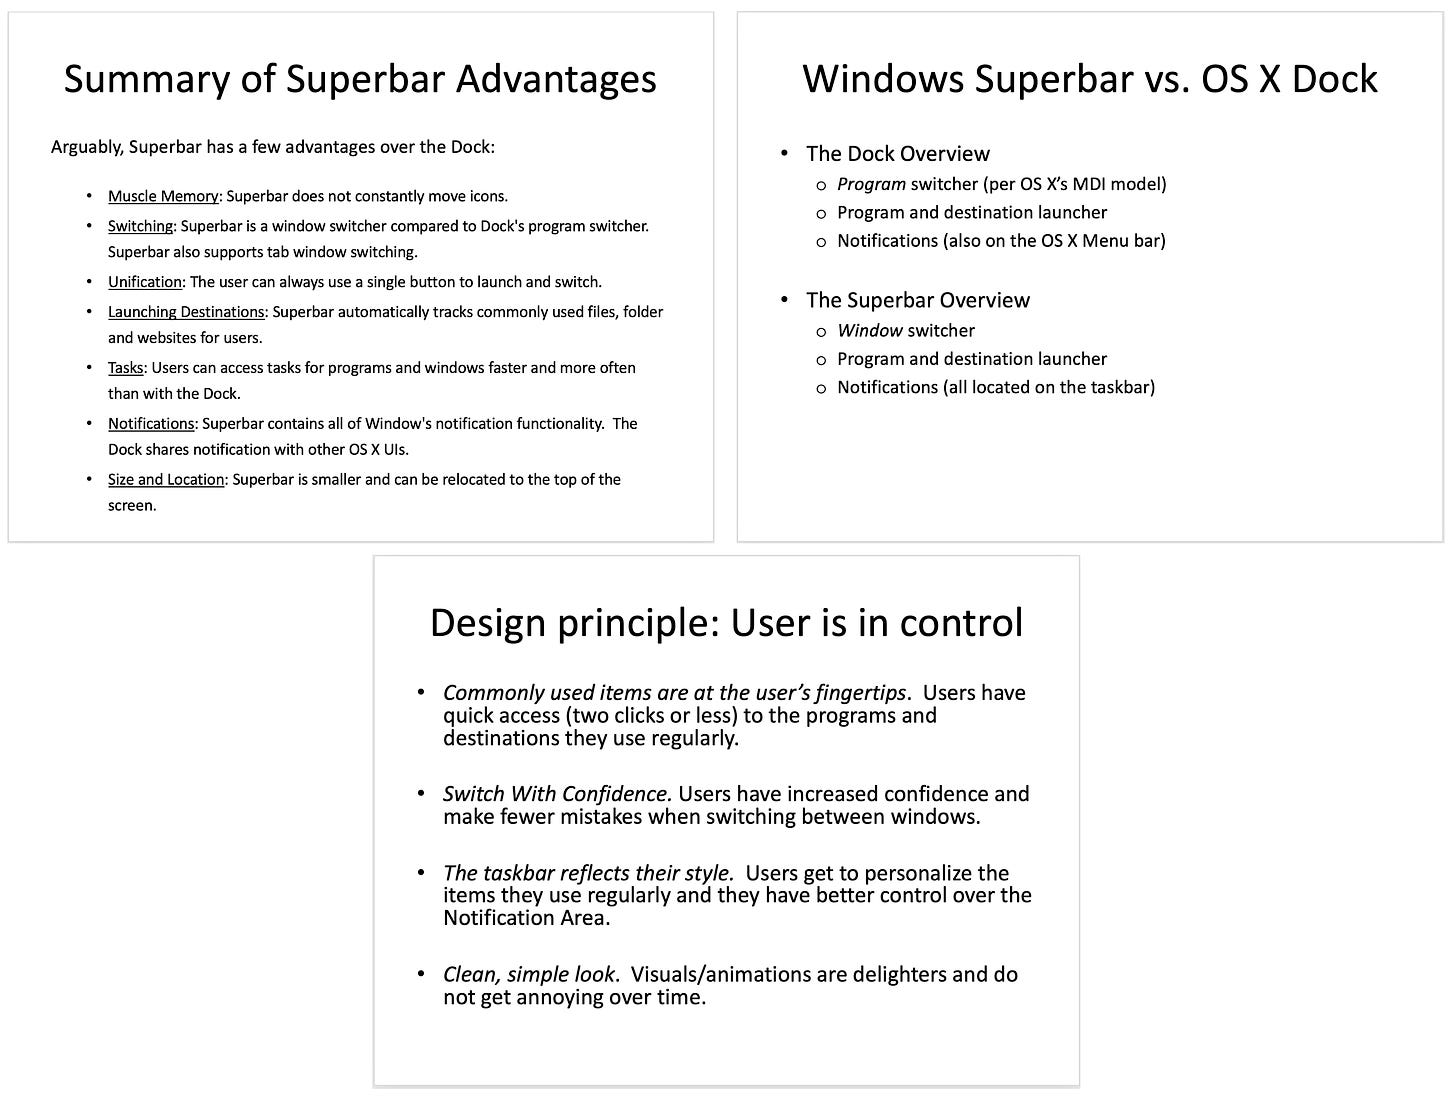 Three slides: (1) Summary of Superbar Advantages Windows Superbar vs. OS X Dock Arguably, Superbar has a few advantages over the Dock: • Muscle Memory: Superbar does not constantly move icons. • Switching: Superbar is a window switcher compared to Dock's program switcher. Superbar also supports tab window switching. • Unification: The user can always use a single button to launch and switch. • Launching Destinations: Superbar automatically tracks commonly used files, folder and websites for users. • Tasks: Users can access tasks for programs and windows faster and more often than with the Dock. • Notifications: Superbar contains all of Window's notification functionality. The Dock shares notification with other OS X Uls. • Size and Location: Superbar is smaller and can be relocated to the top of the screen (2) (3) Design principle: User is in control quick access (two clicks or less) to the to the programs and destinations they use regularly. Switch With Confidence. Users have increased confidence and  make fewer mistakes when switching between windows. bar reflects their style. Users get to personalize the items they use regularly and they have better control over the Clean, simple look. Visuals/animations are delighters and do not get annoying over time.